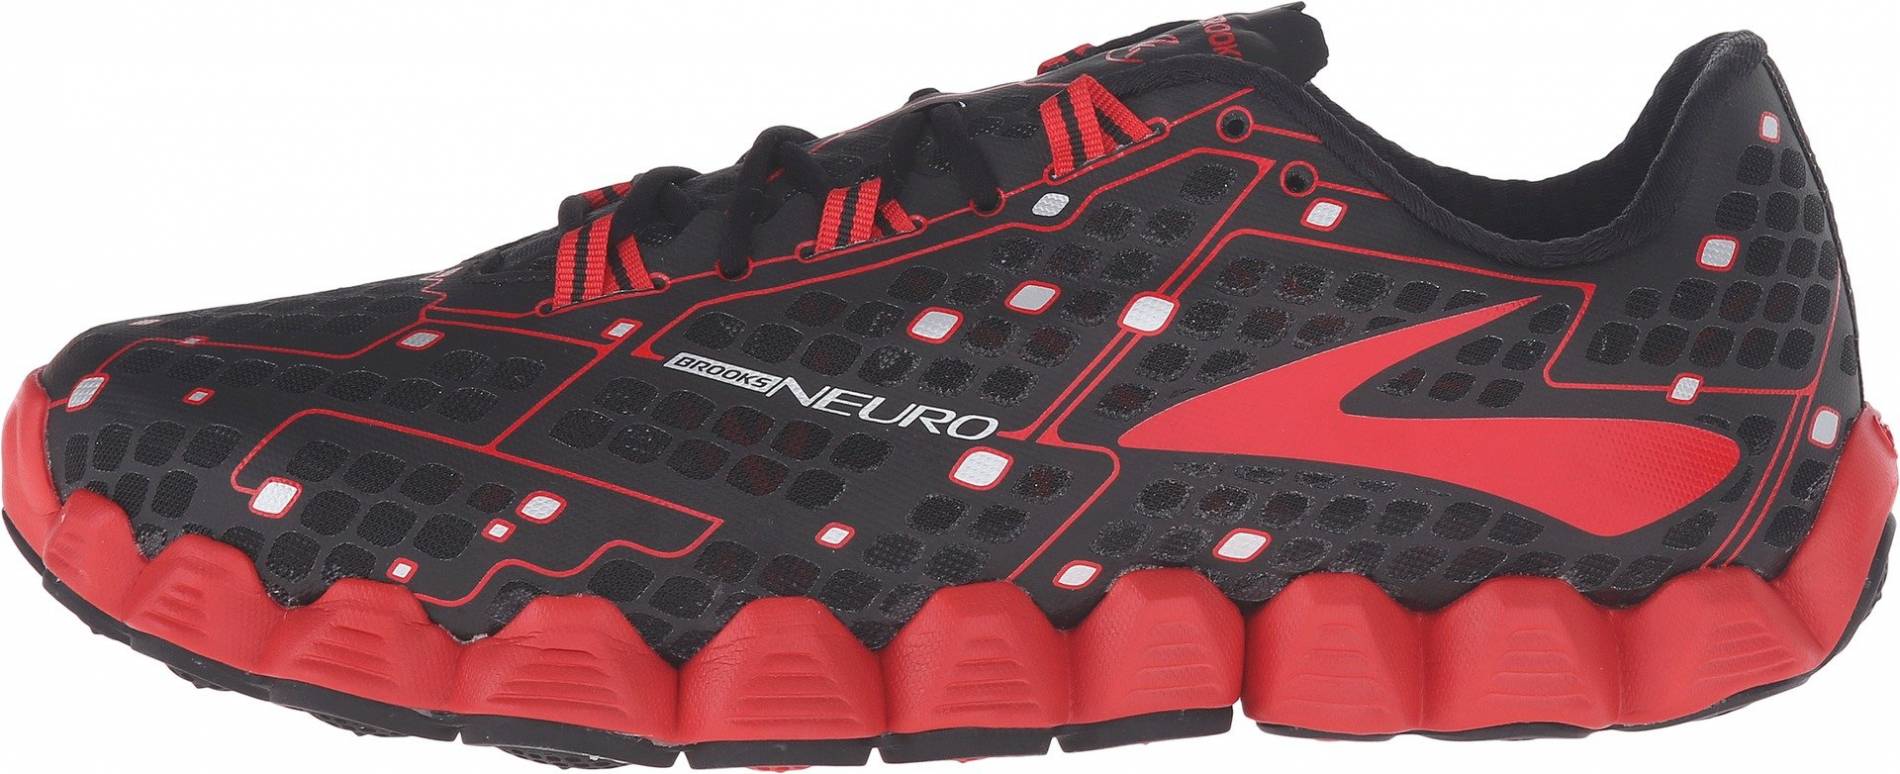 Only $83 + Review of Brooks Neuro 